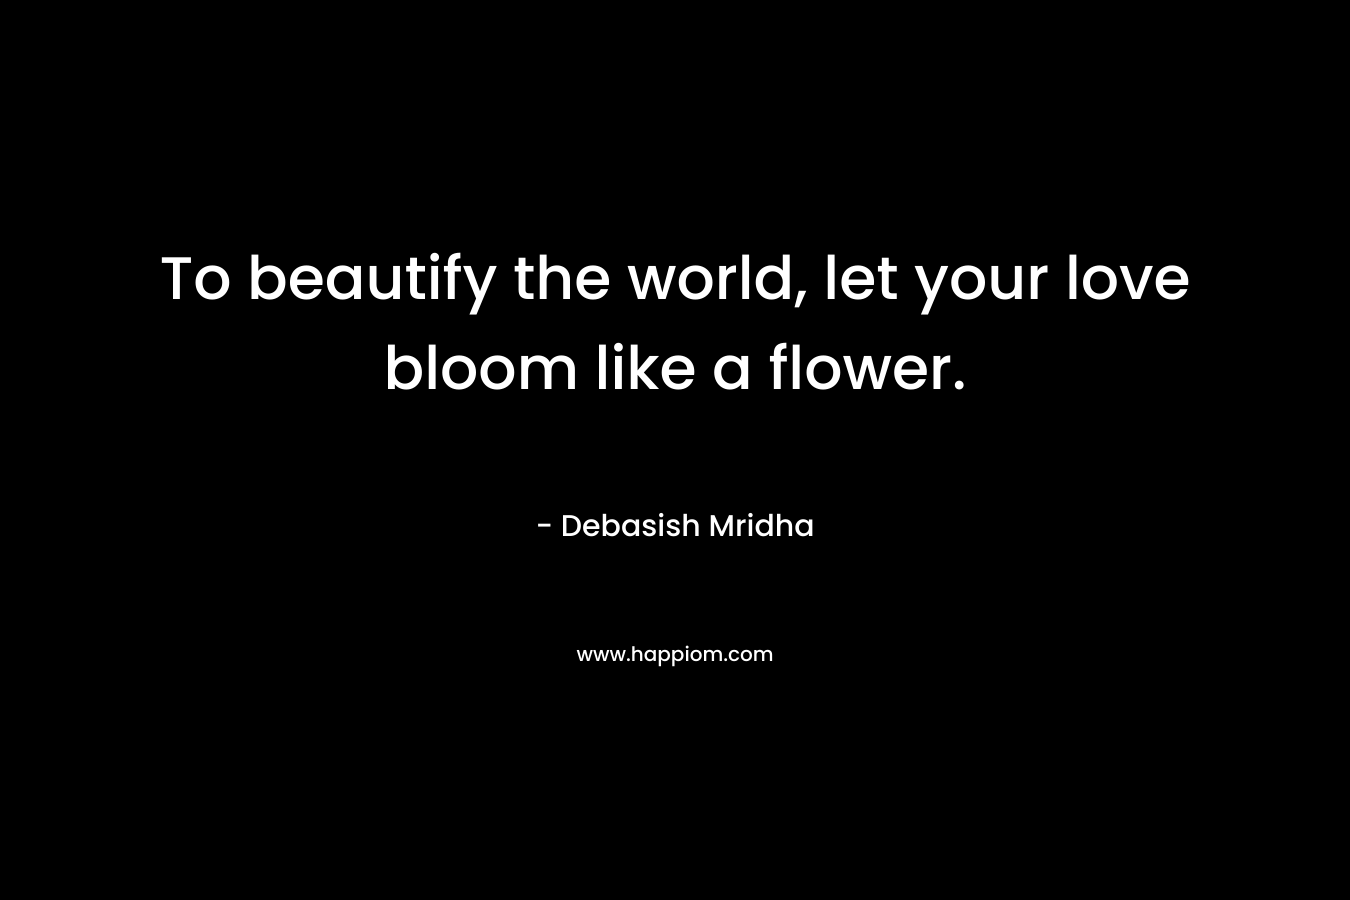 To beautify the world, let your love bloom like a flower.